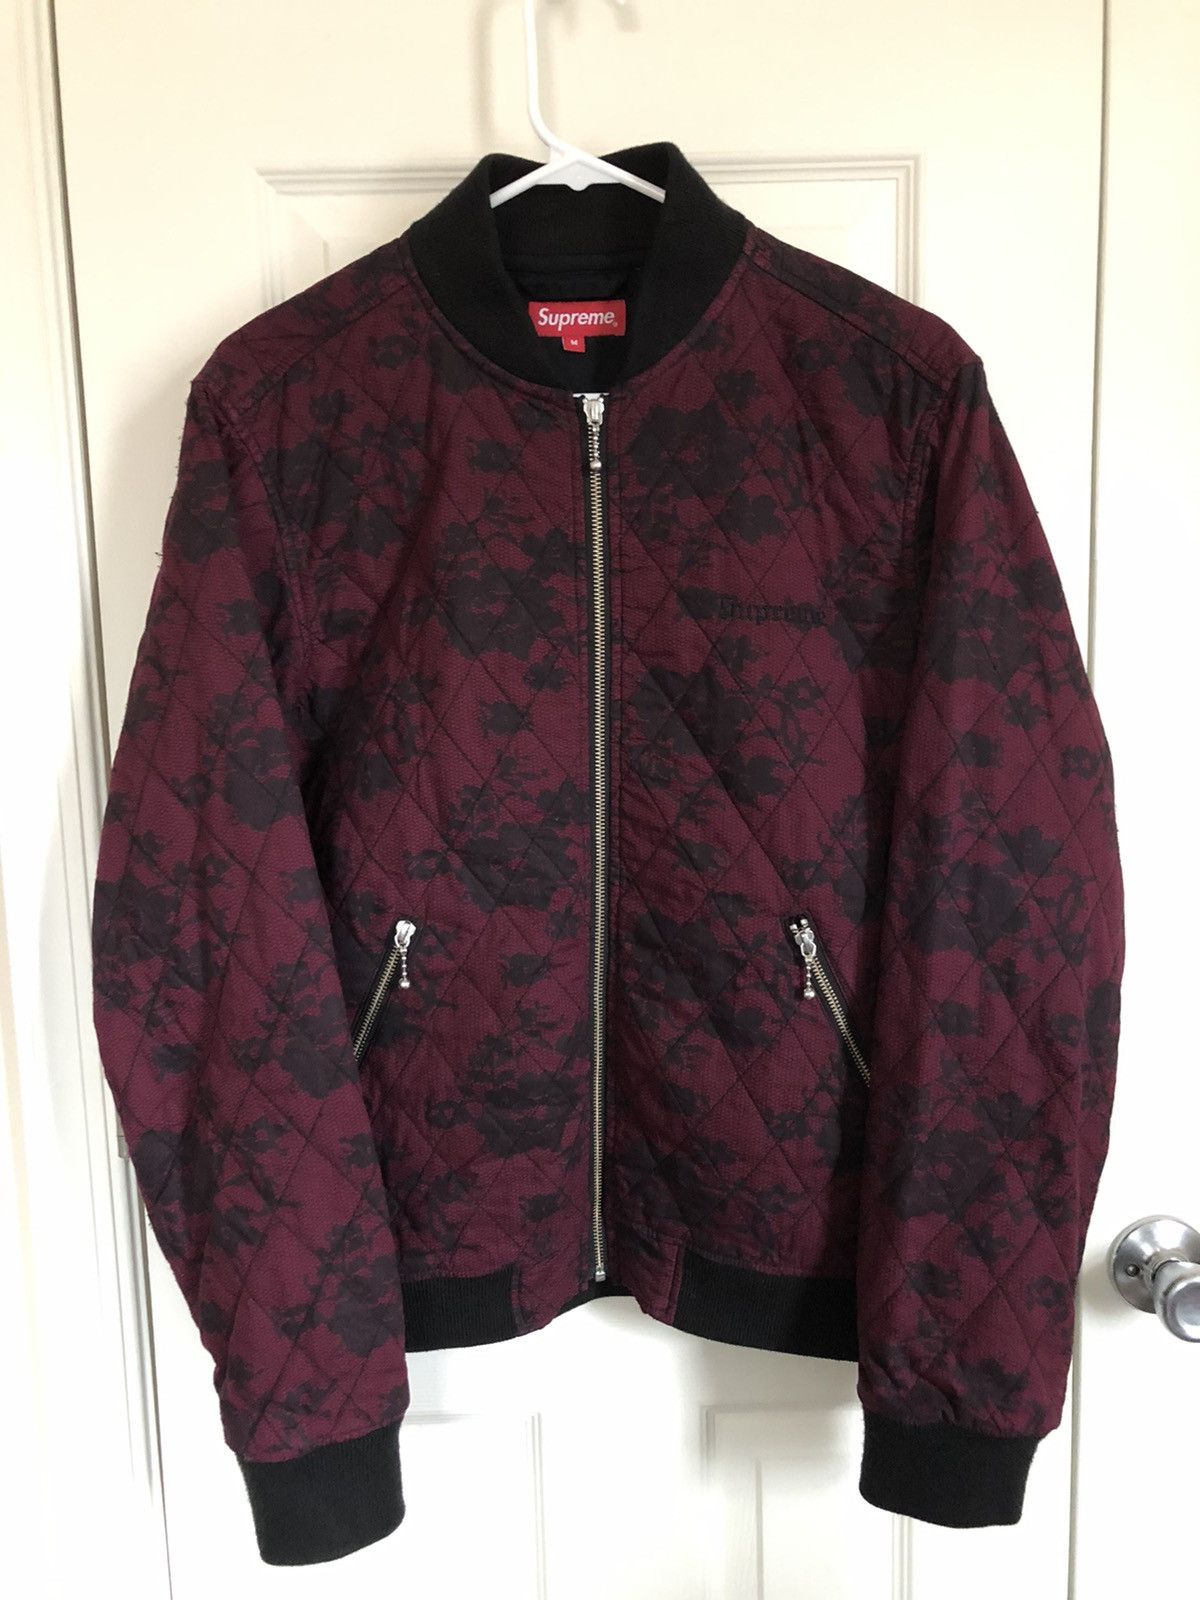 Supreme Supreme Quilted Lace Bomber | Grailed